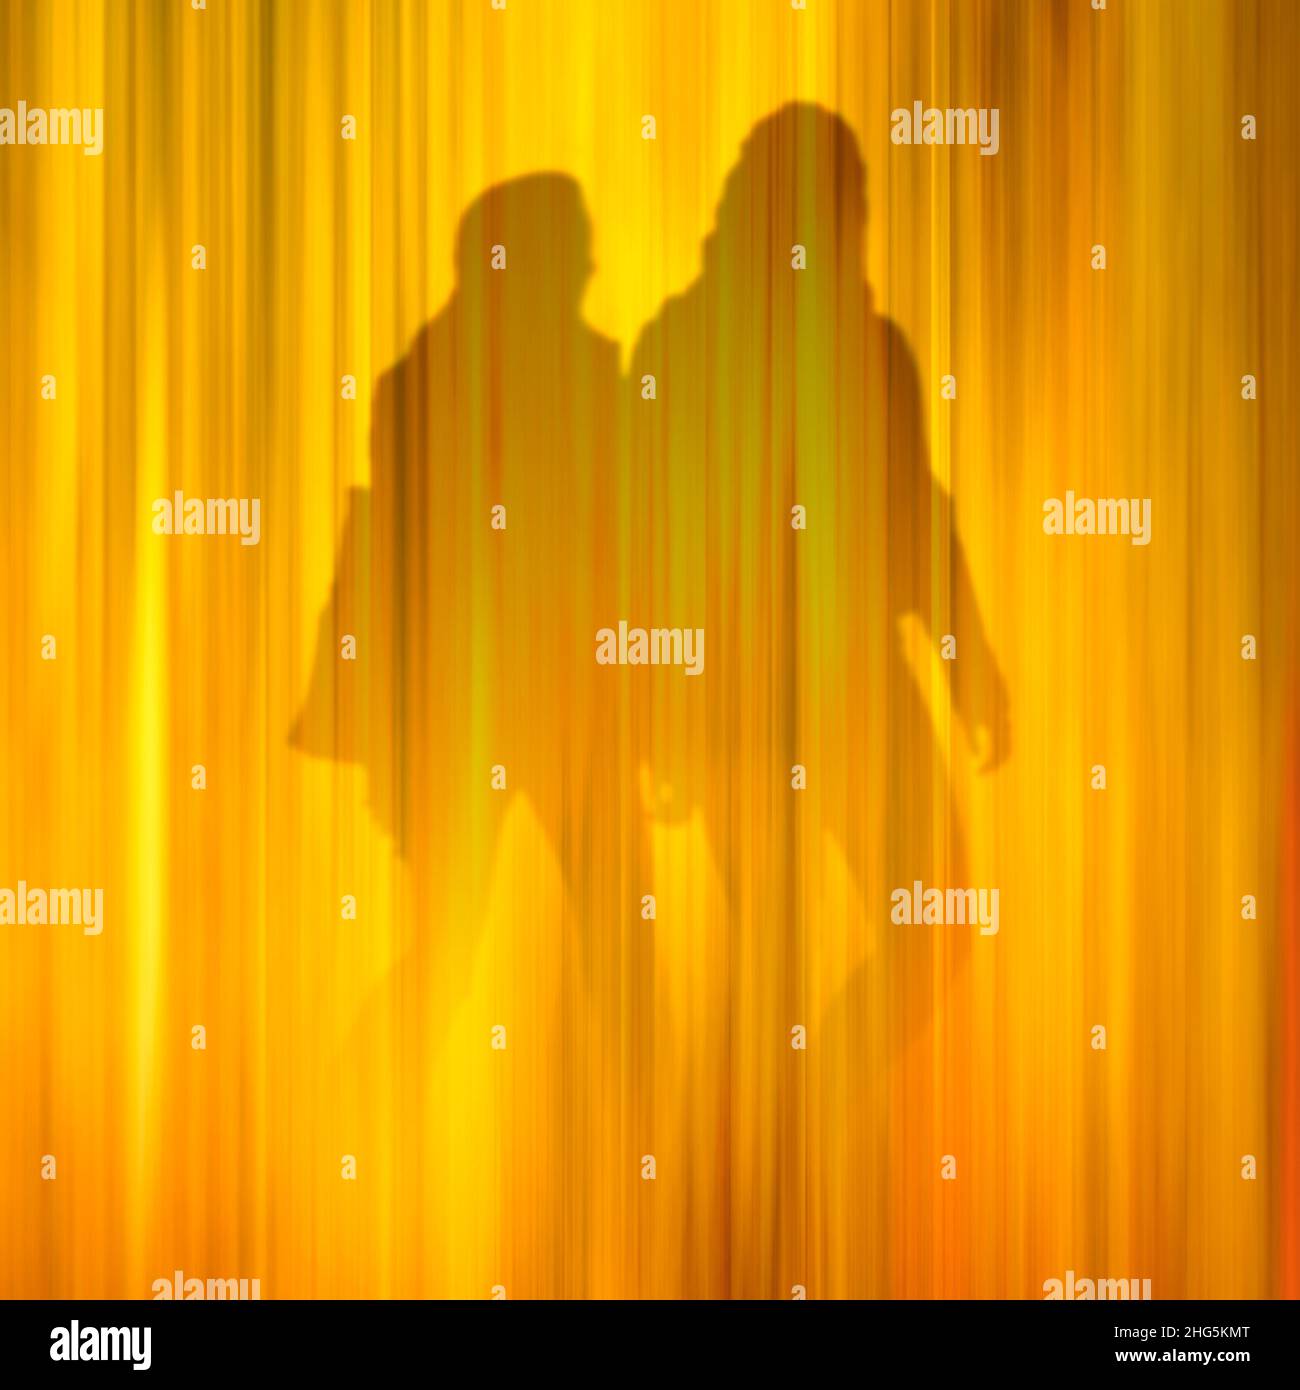 Conceptual image of two people walking. Their identity, gender and relationship is ambiguous. Stock Photo